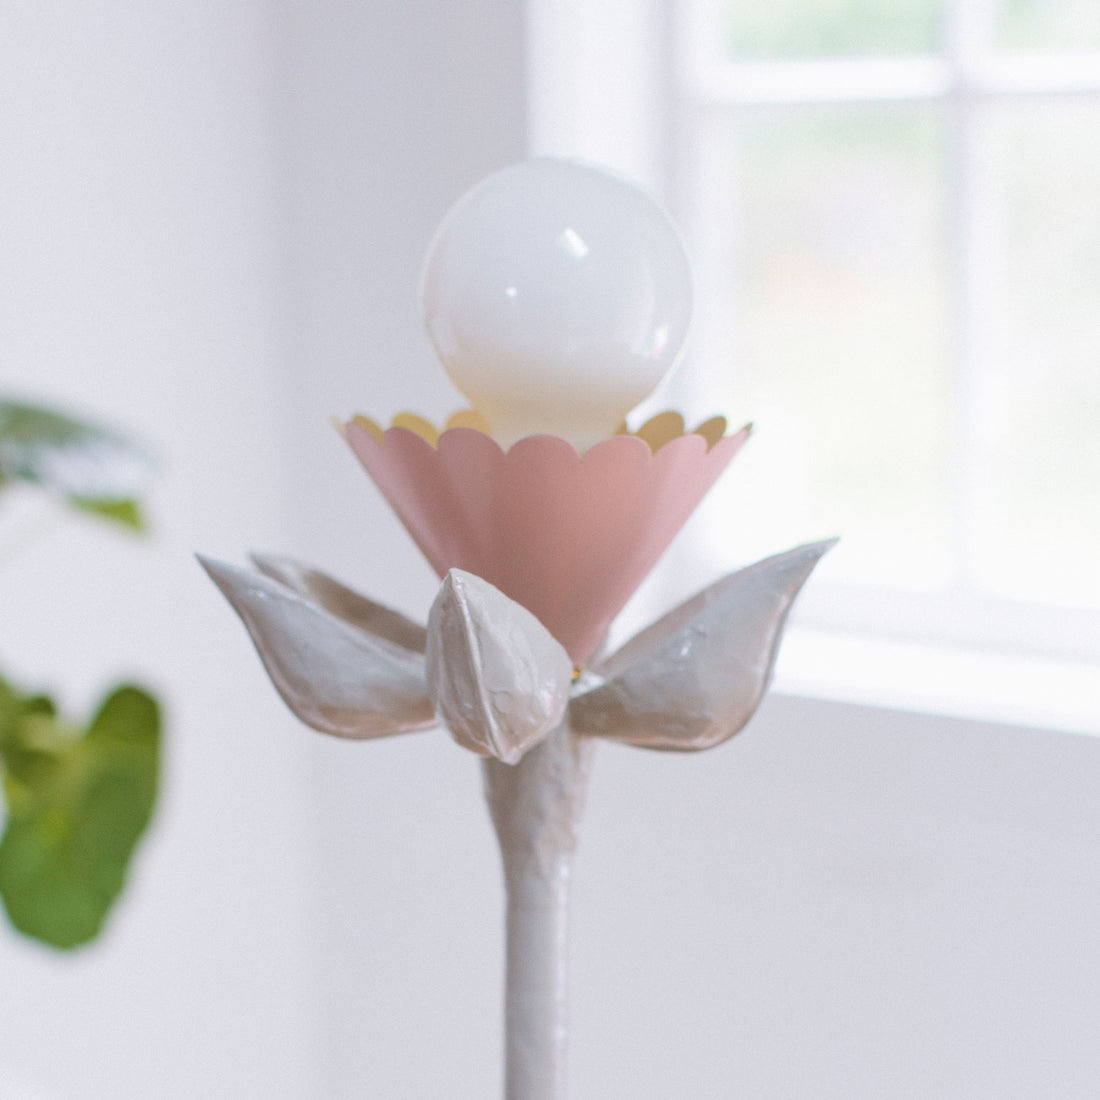 booper lamp by stray dog designs with papier mache petals and an exposed bulb.